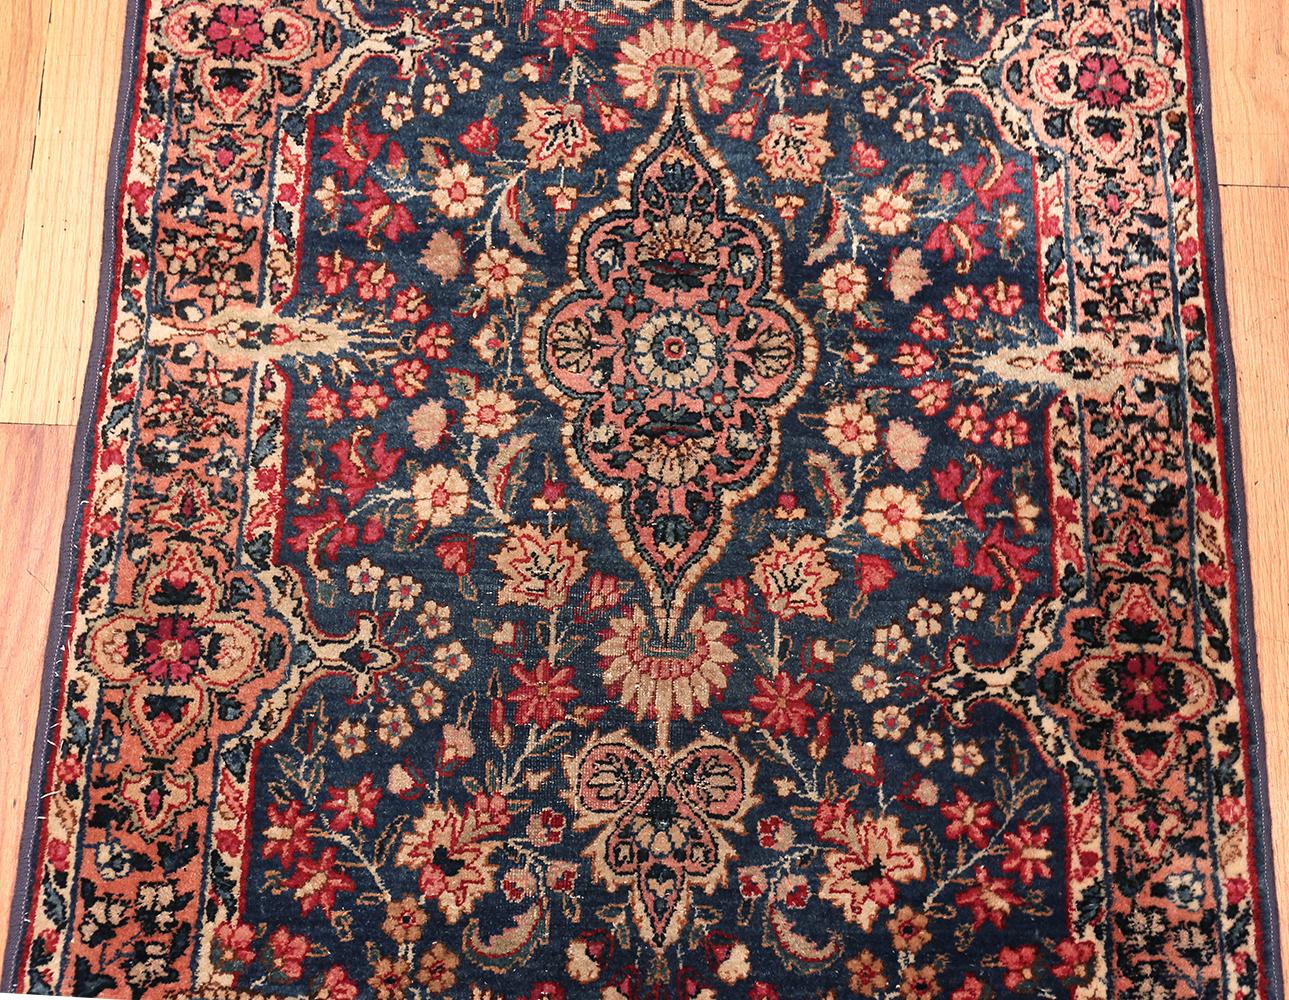 Hand-Knotted Floral Design Antique Persian Kerman Runner Rug. Size: 2 ft 6 in x 25 ft 6 in